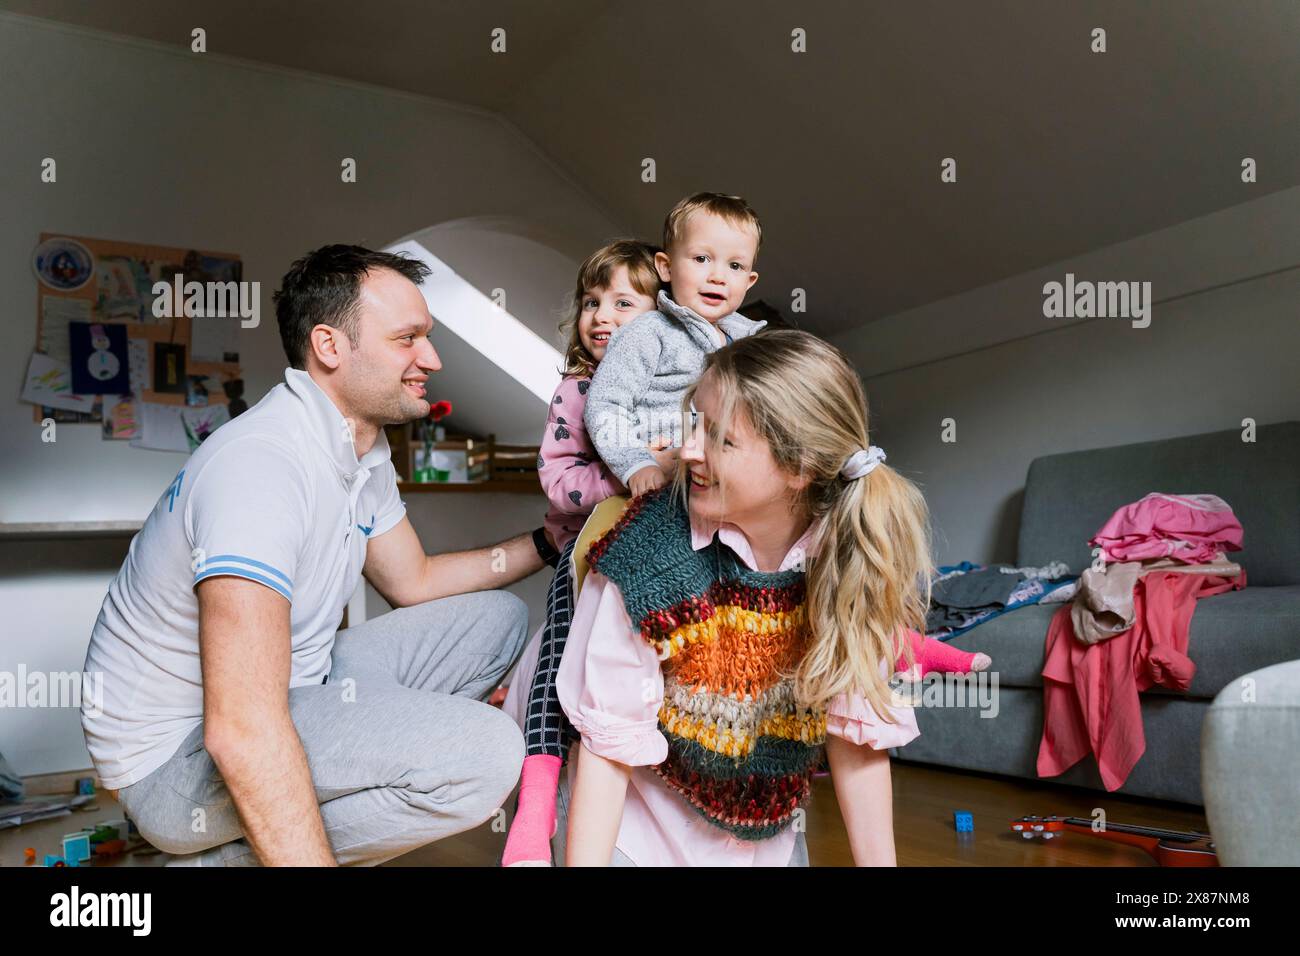 Smiling man by children on mother's back in living room Stock Photo